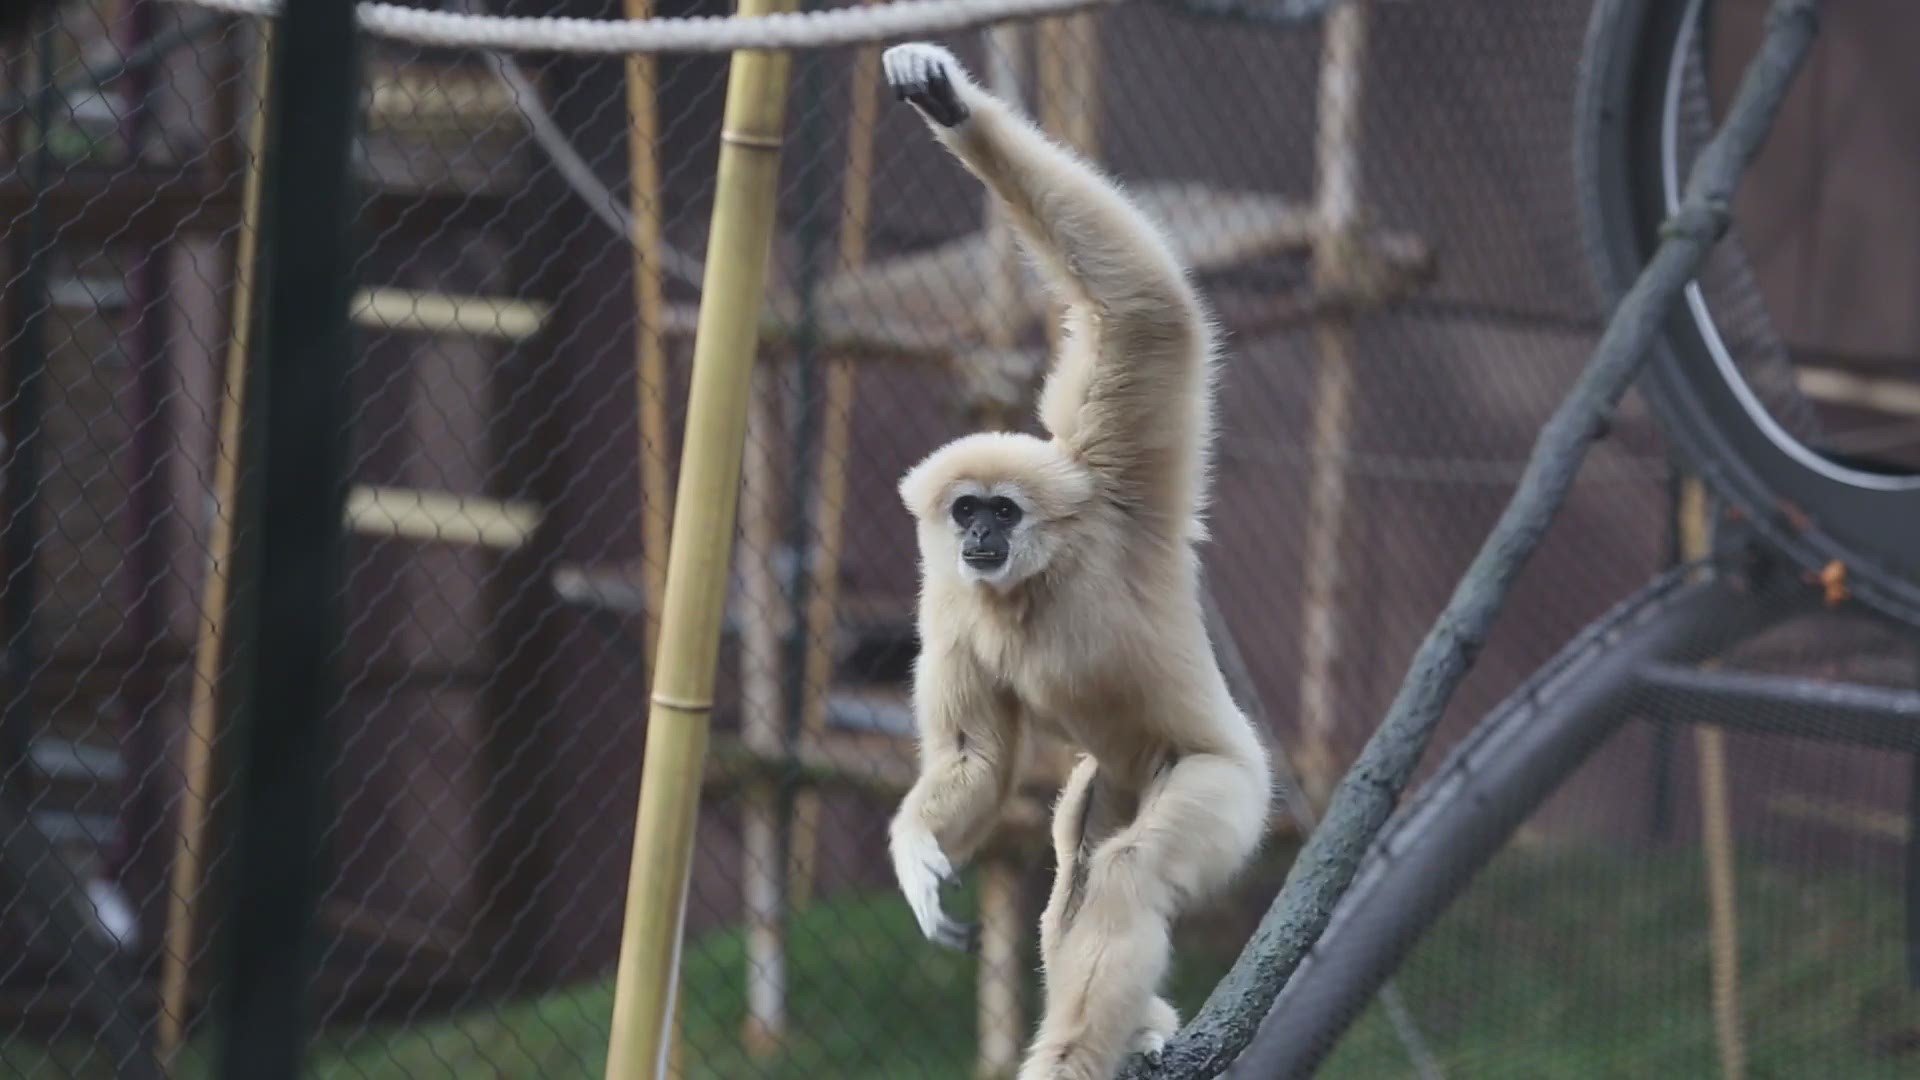 Georgie enjoys swinging through his large enclosure at Zoo Knoxville and interacting with zoo visitors.